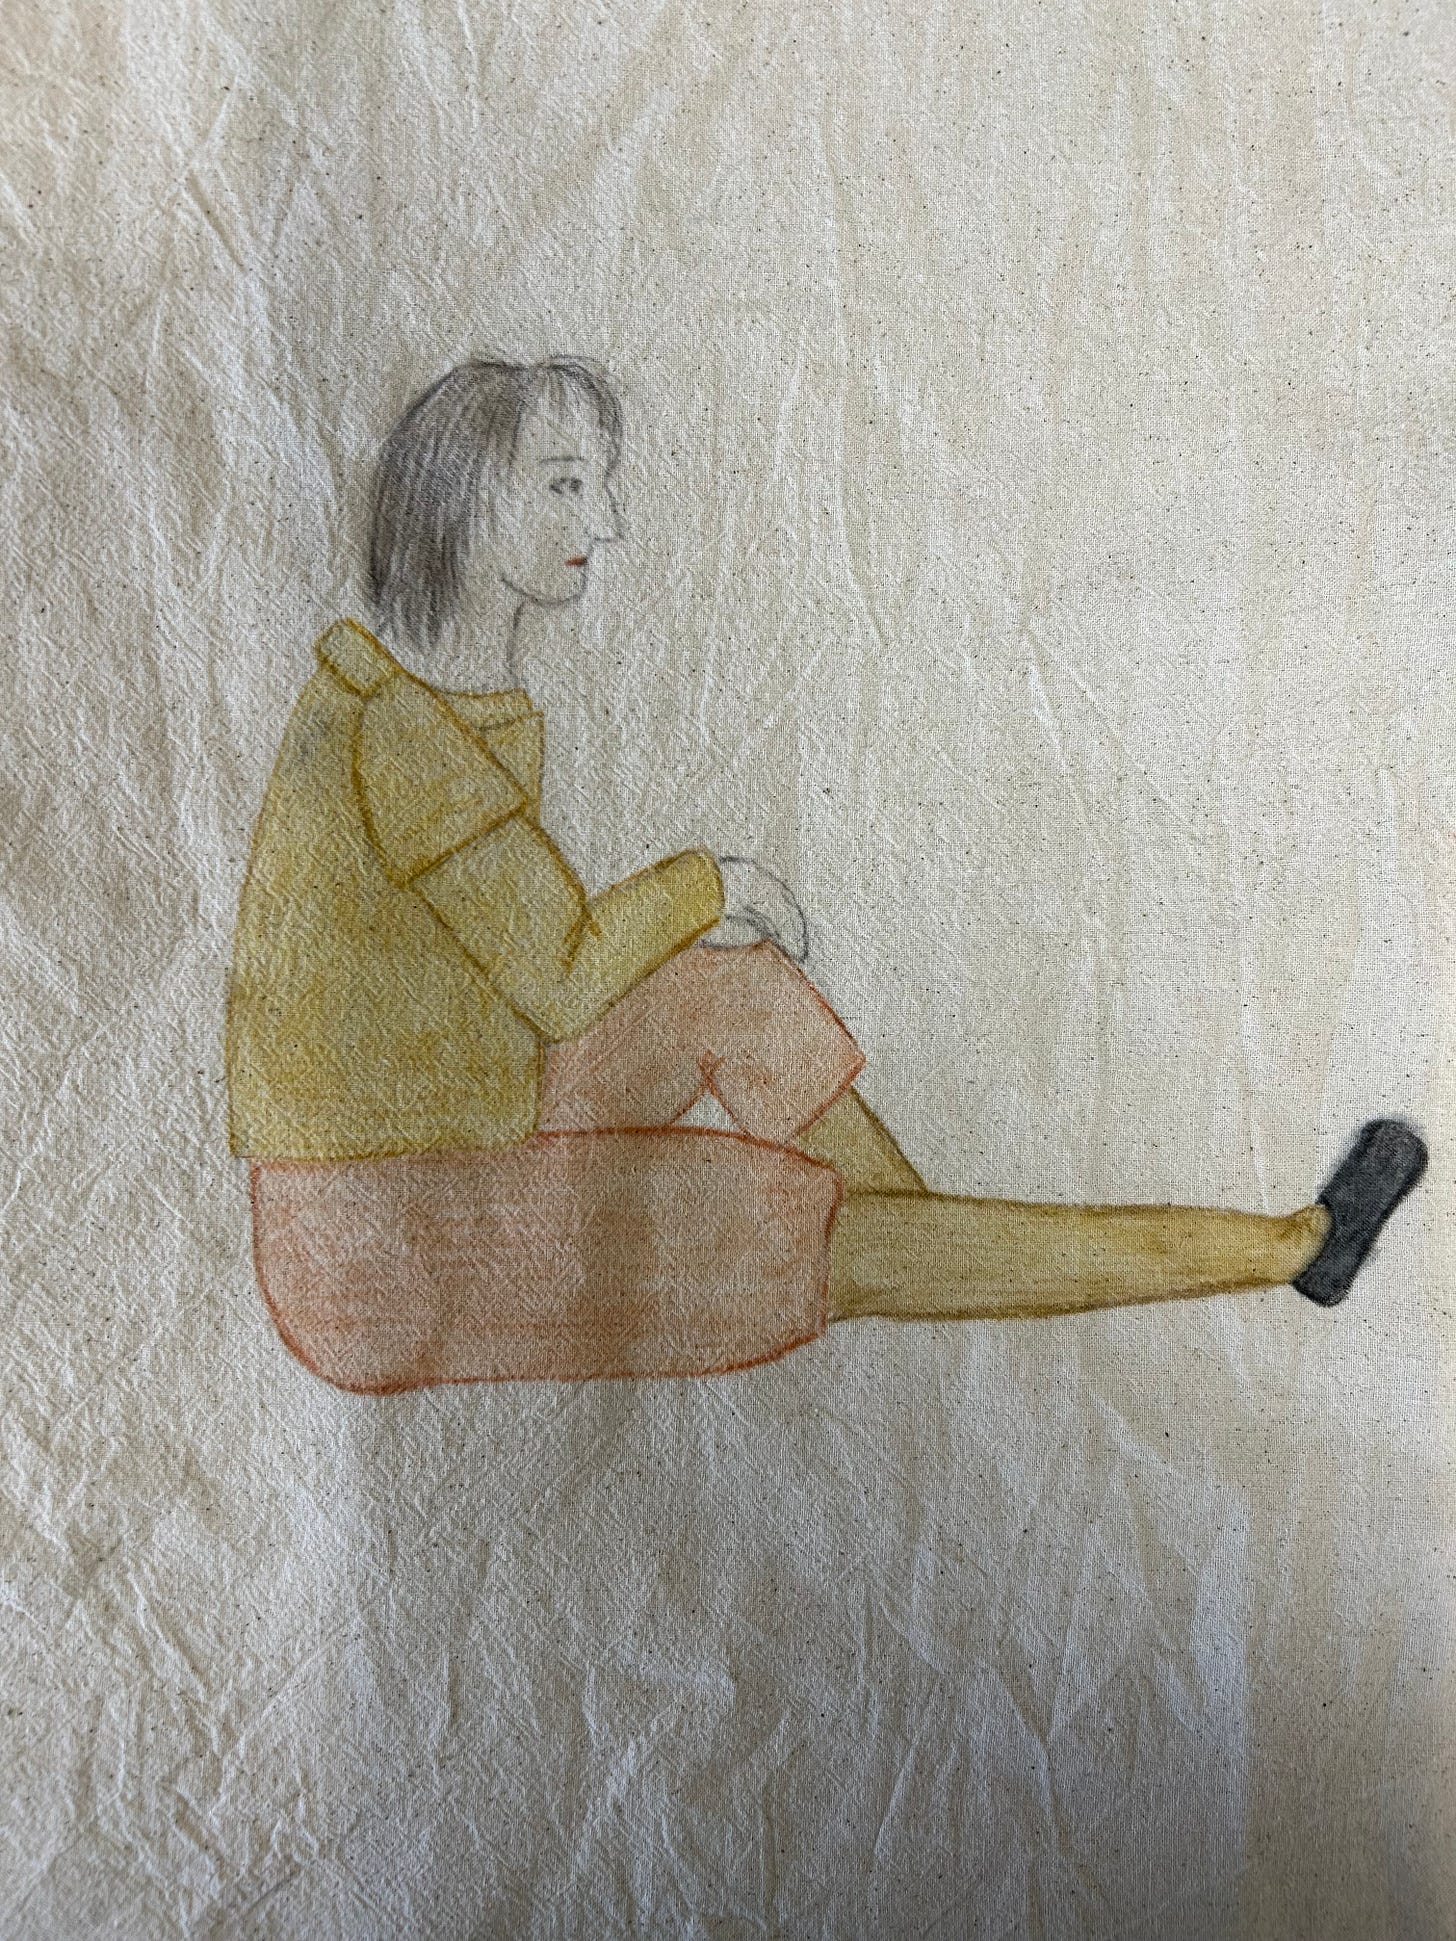 An image of a young man seated on the ground, drawn onto fabric. He is dressed in dull coloured 16th century dress with unkempt hair